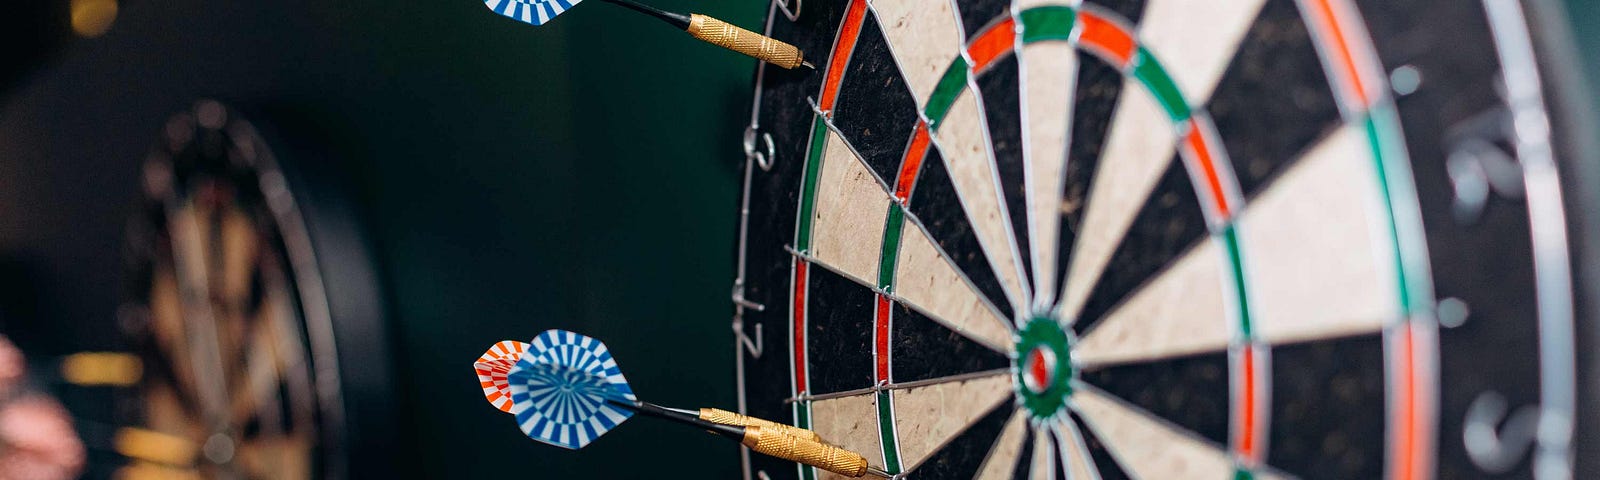 Dart board with darts sticking into the outer circle — no bullseye hits